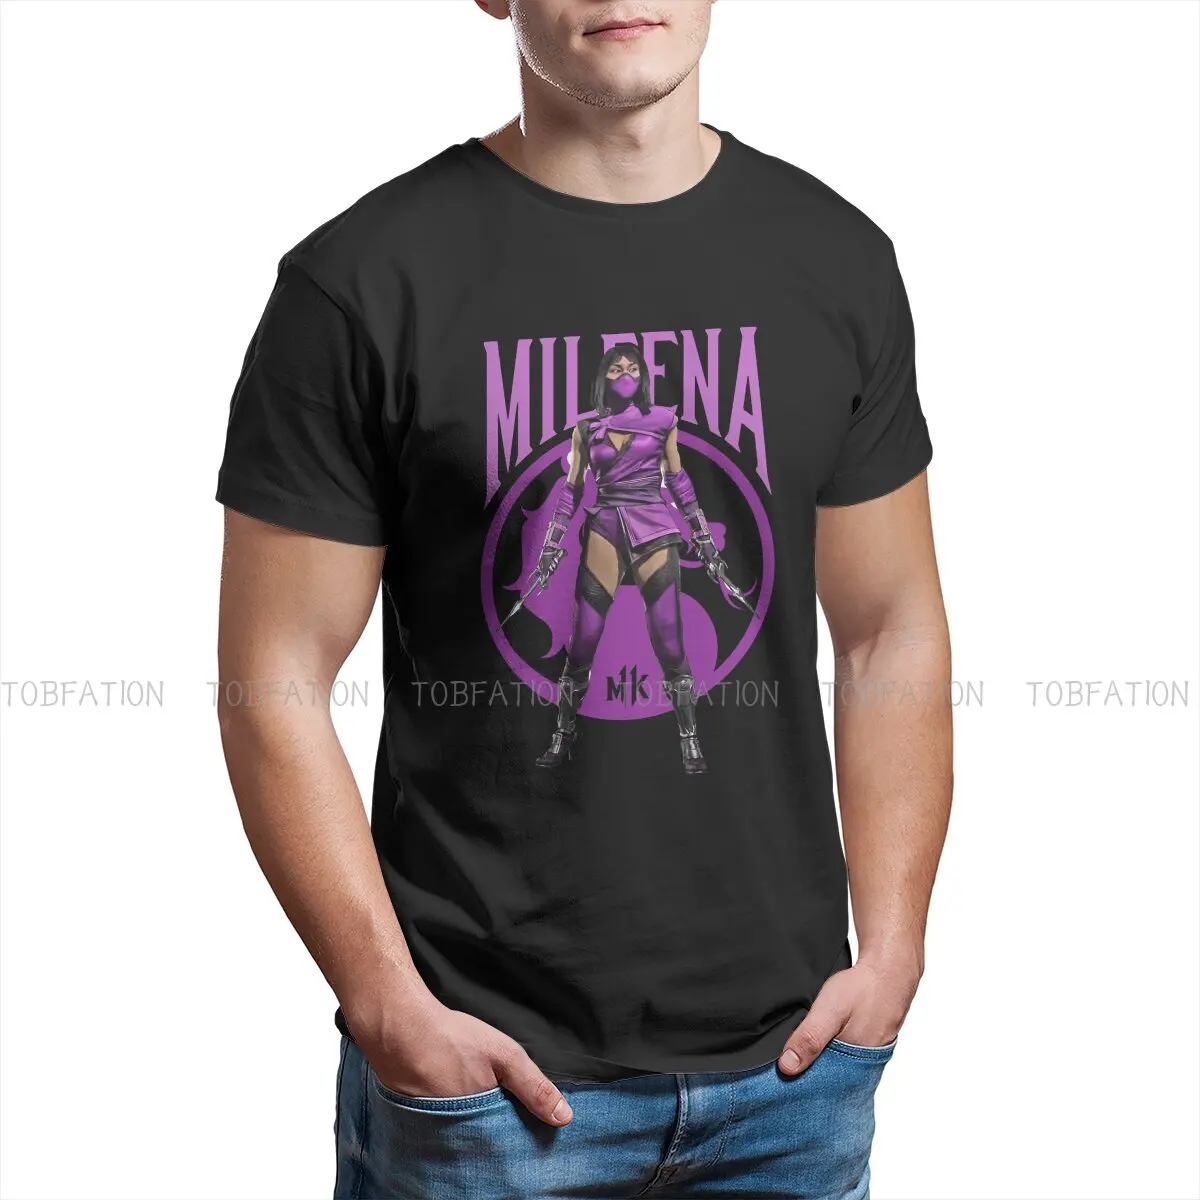 

Mortal Kombat Lord Raiden Film Polyester TShirts Cool MILEENA Personalize Homme T Shirt Hipster Clothing 6XL